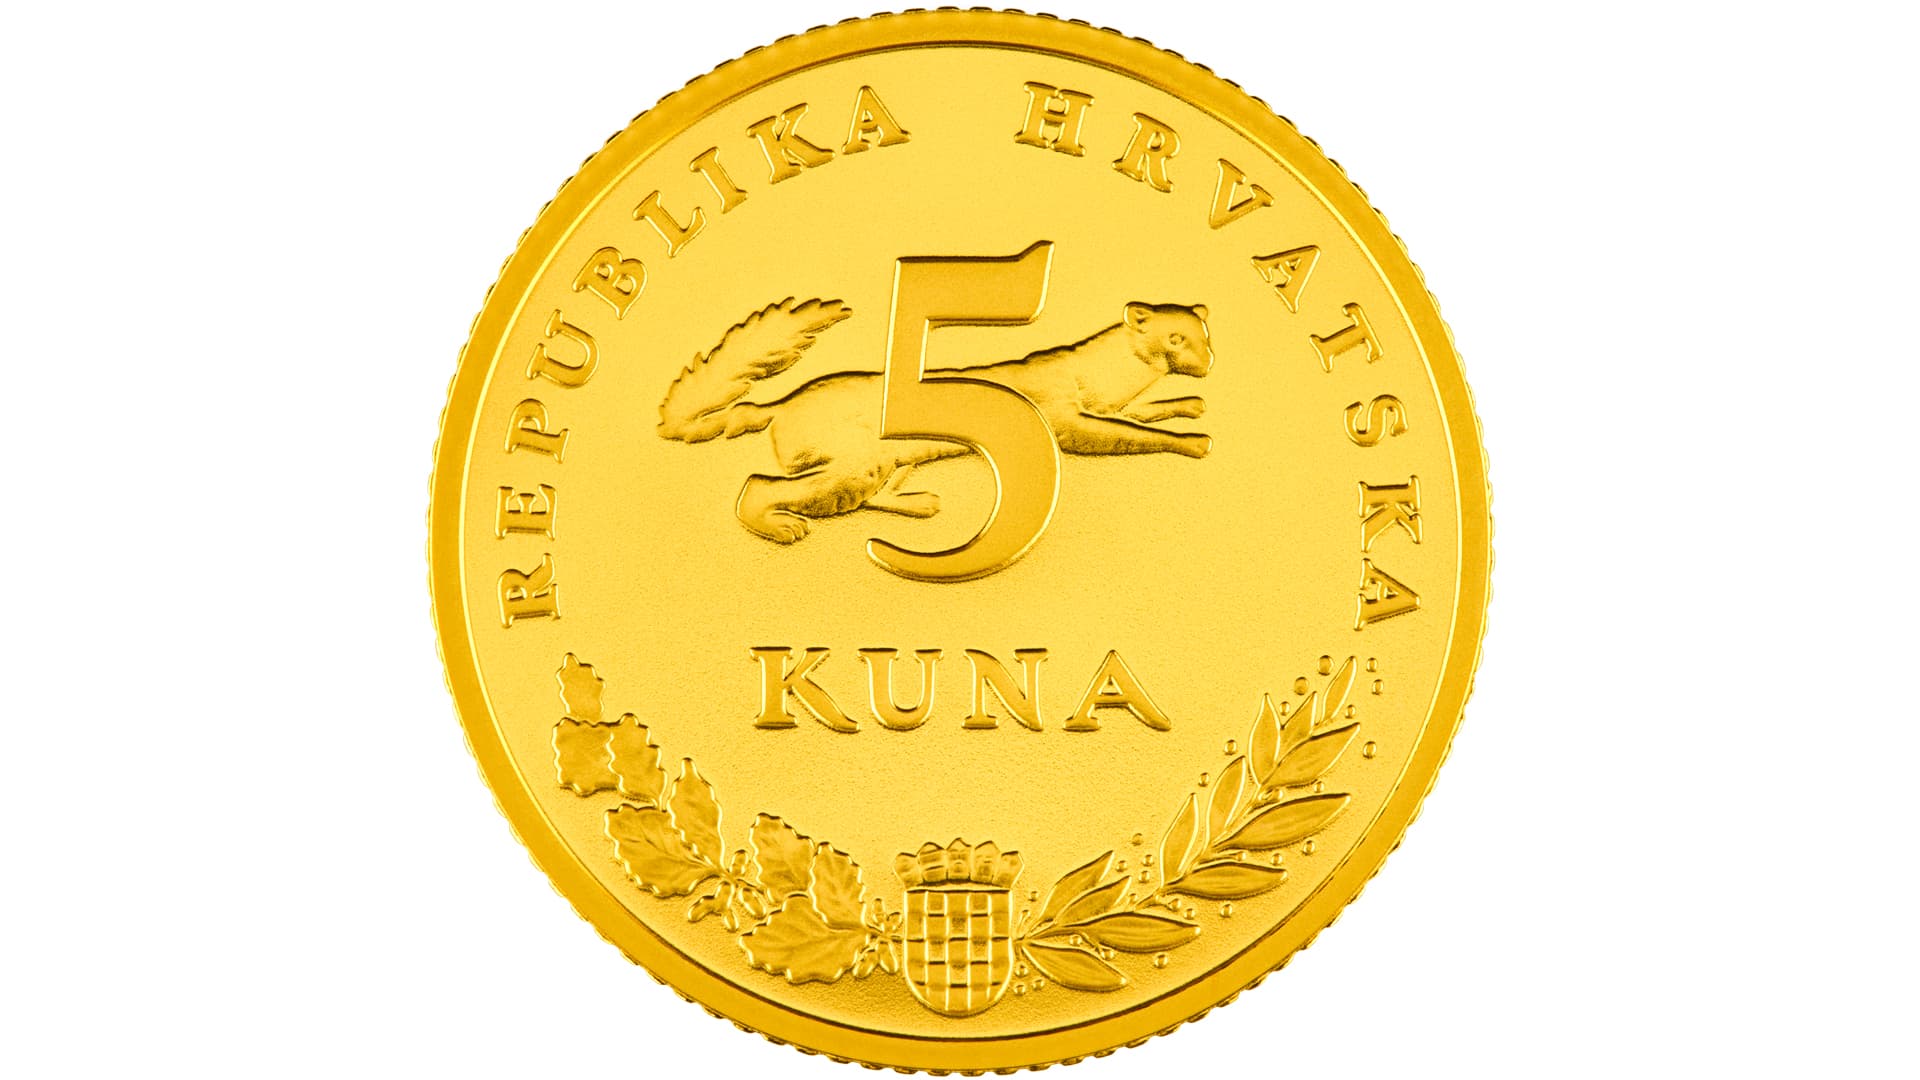 CNB issues a new Gold Kuna coin